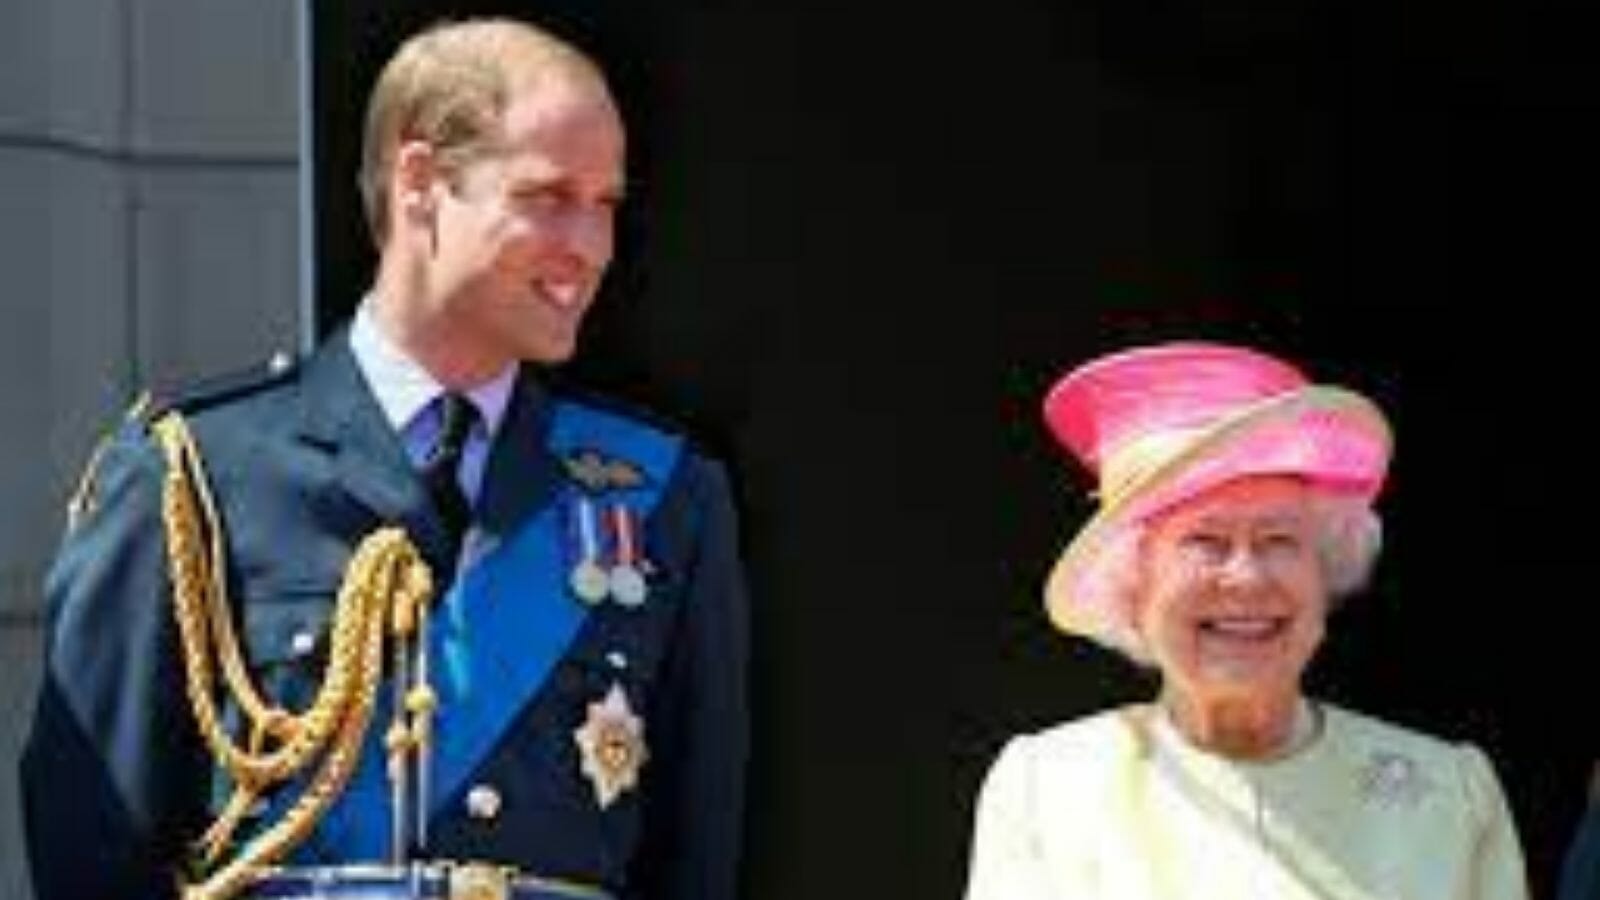 Prince William with the Queen